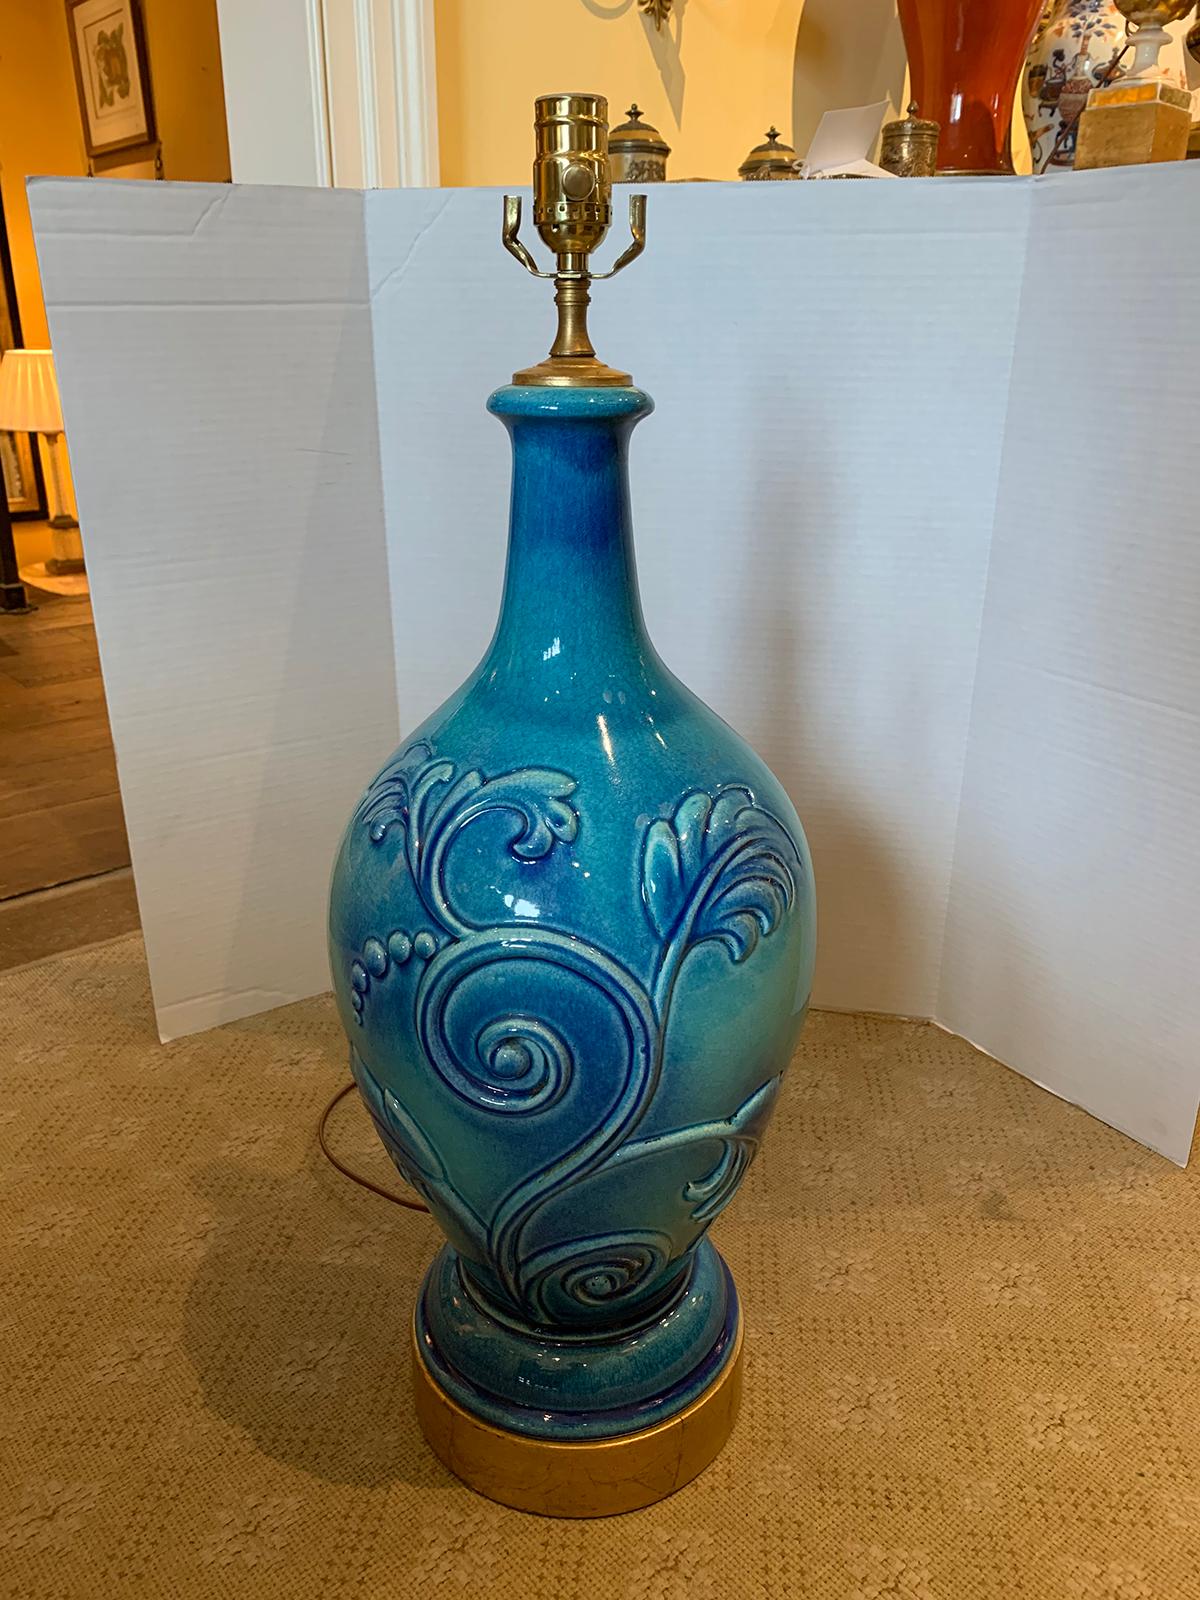 Mid-20th century turquoise pottery lamp with floral motif
New wiring.